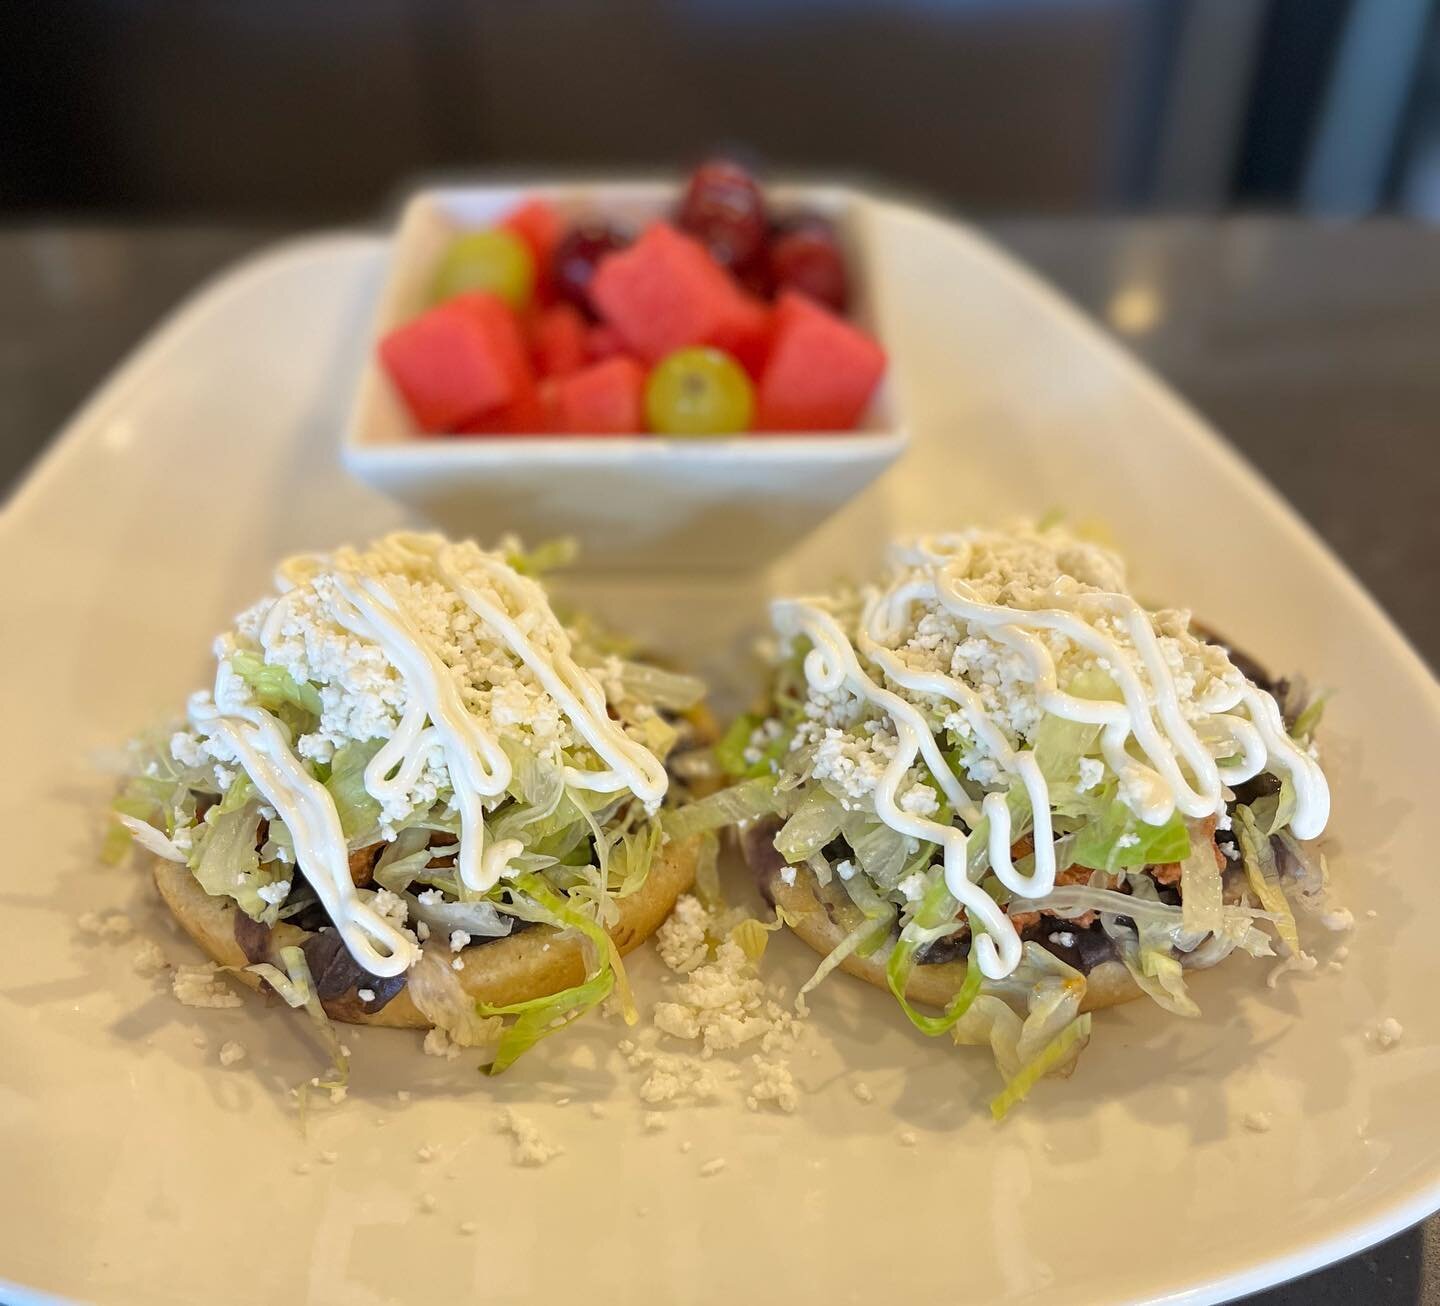 ✨Come Celebrate Our 3 Year Anniversary with us! ✨
Our Special For this Weekend Are
SOPES🔥😋
&bull;Topped with Black Beans, Shredded lettuce, Panela Cheese, Sour Cream, and choice of Carne Asada or Chorizo. Served with a side. 
.
#anniversary #thanky